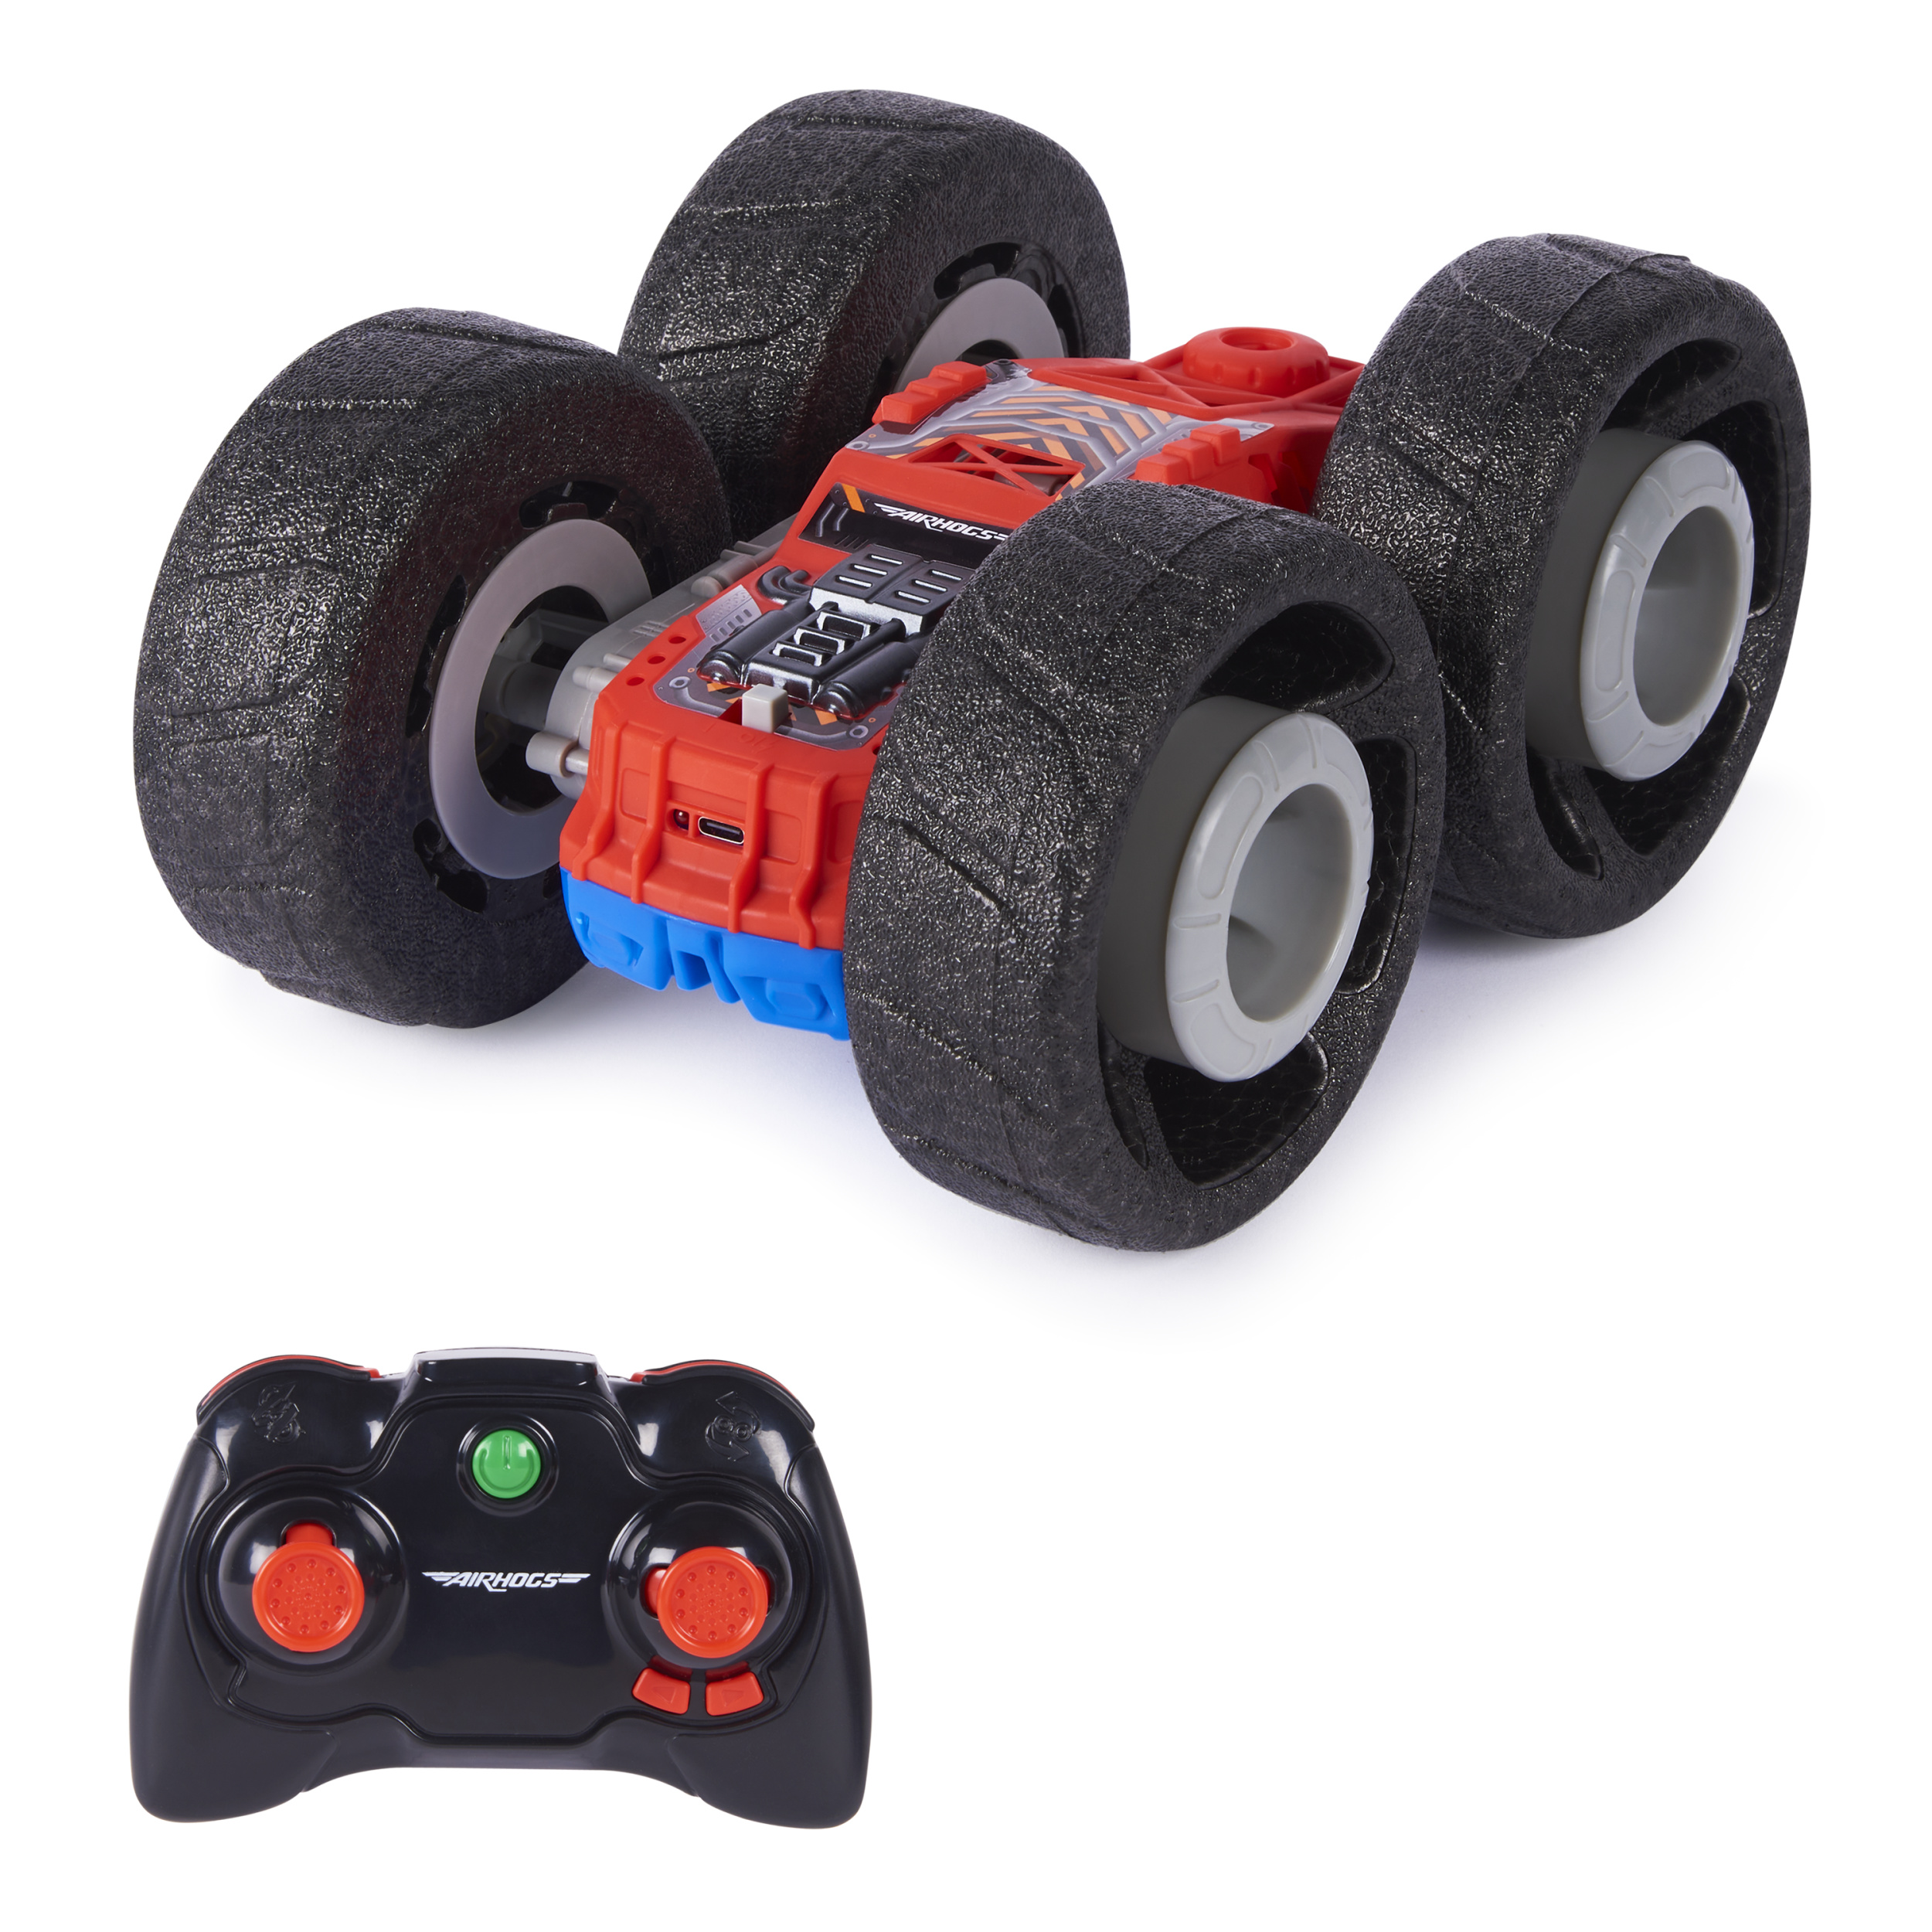 Air Hogs Super Soft, Flippin Frenzy 2-in-1 Stunt RC Vehicle - image 1 of 6